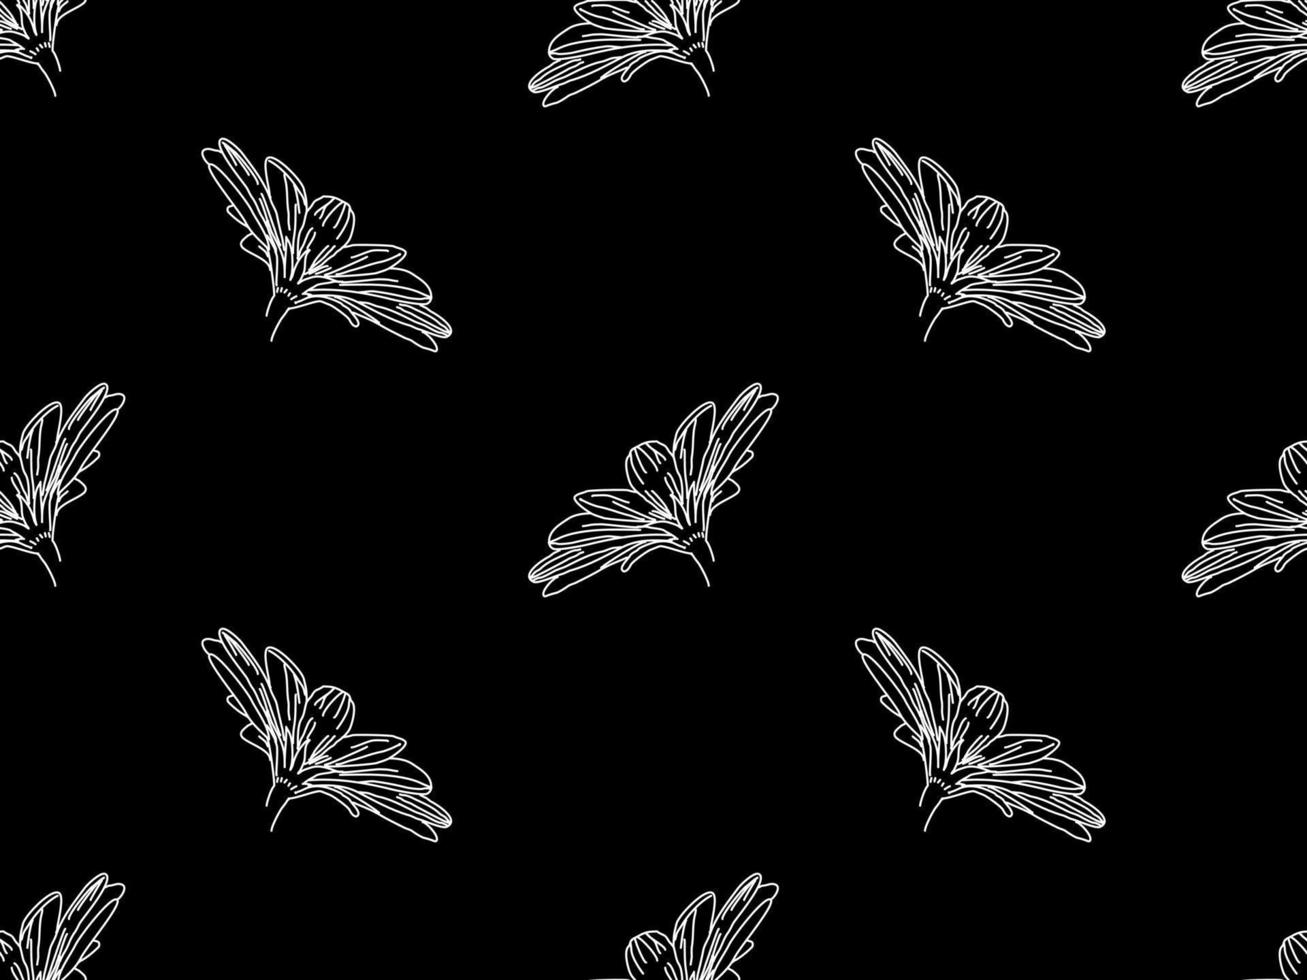 Flower cartoon character seamless pattern on black background vector